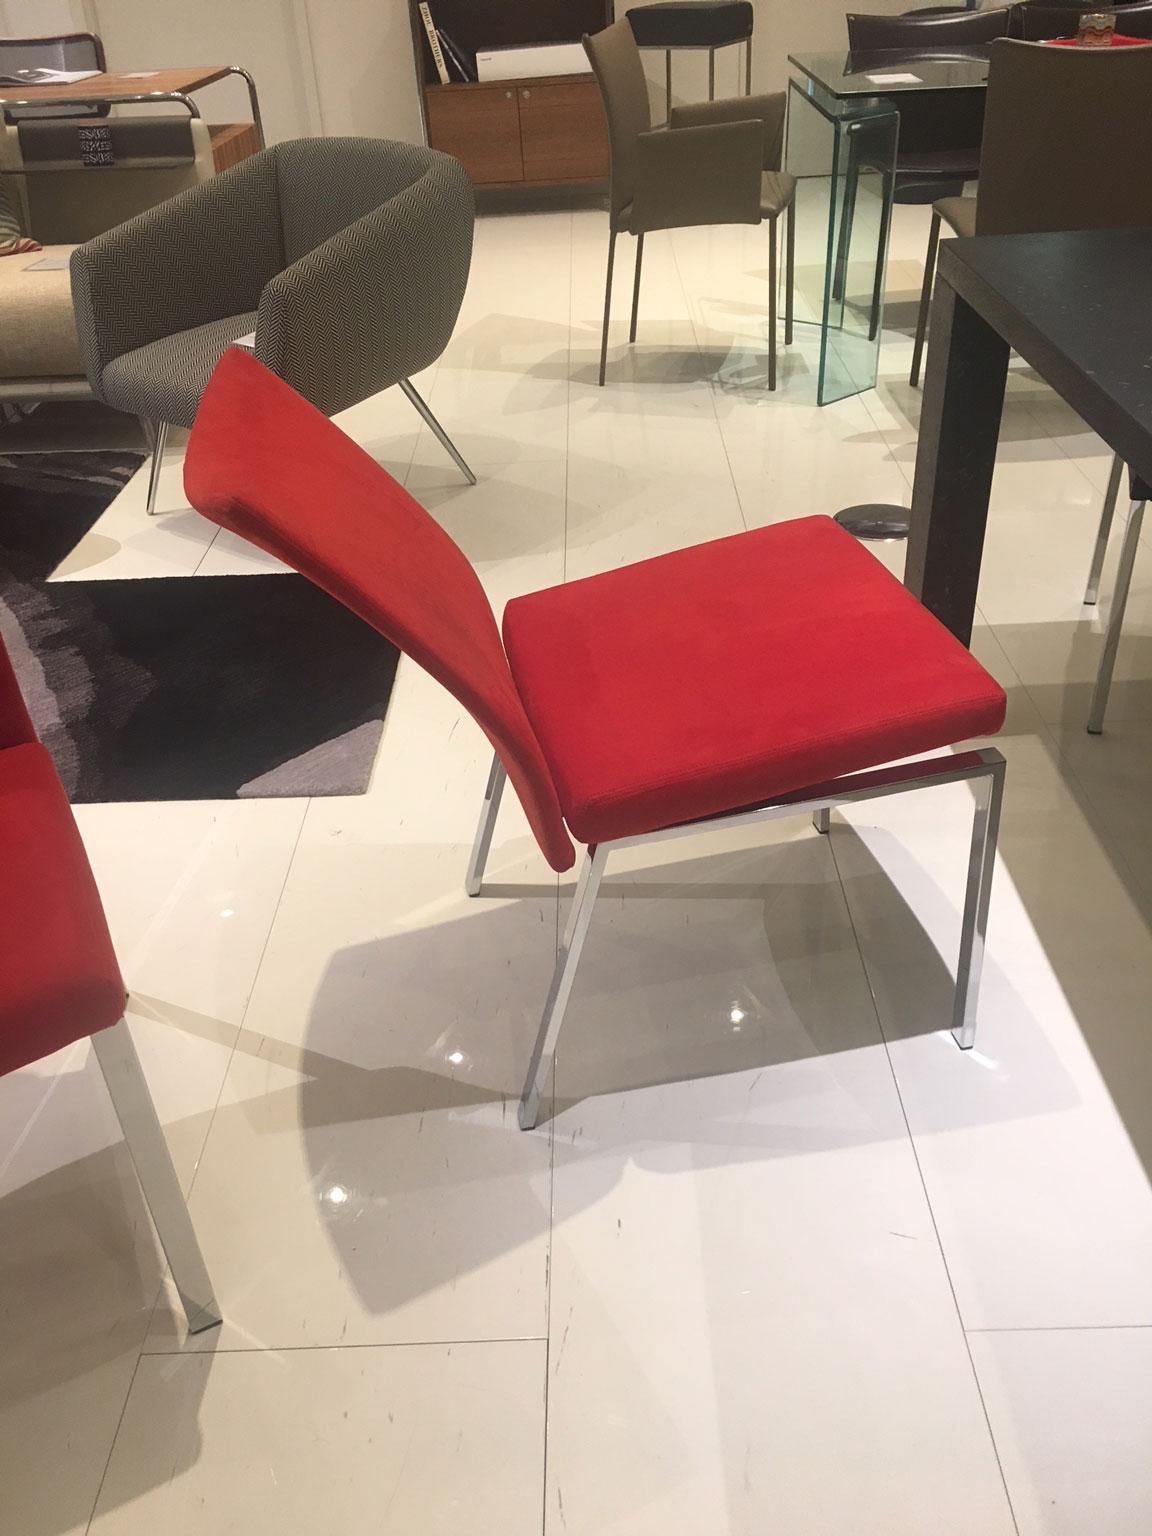 German Set of 2 Red Alcantera Dining Chairs with Recline Function Polished Chrome Legs For Sale